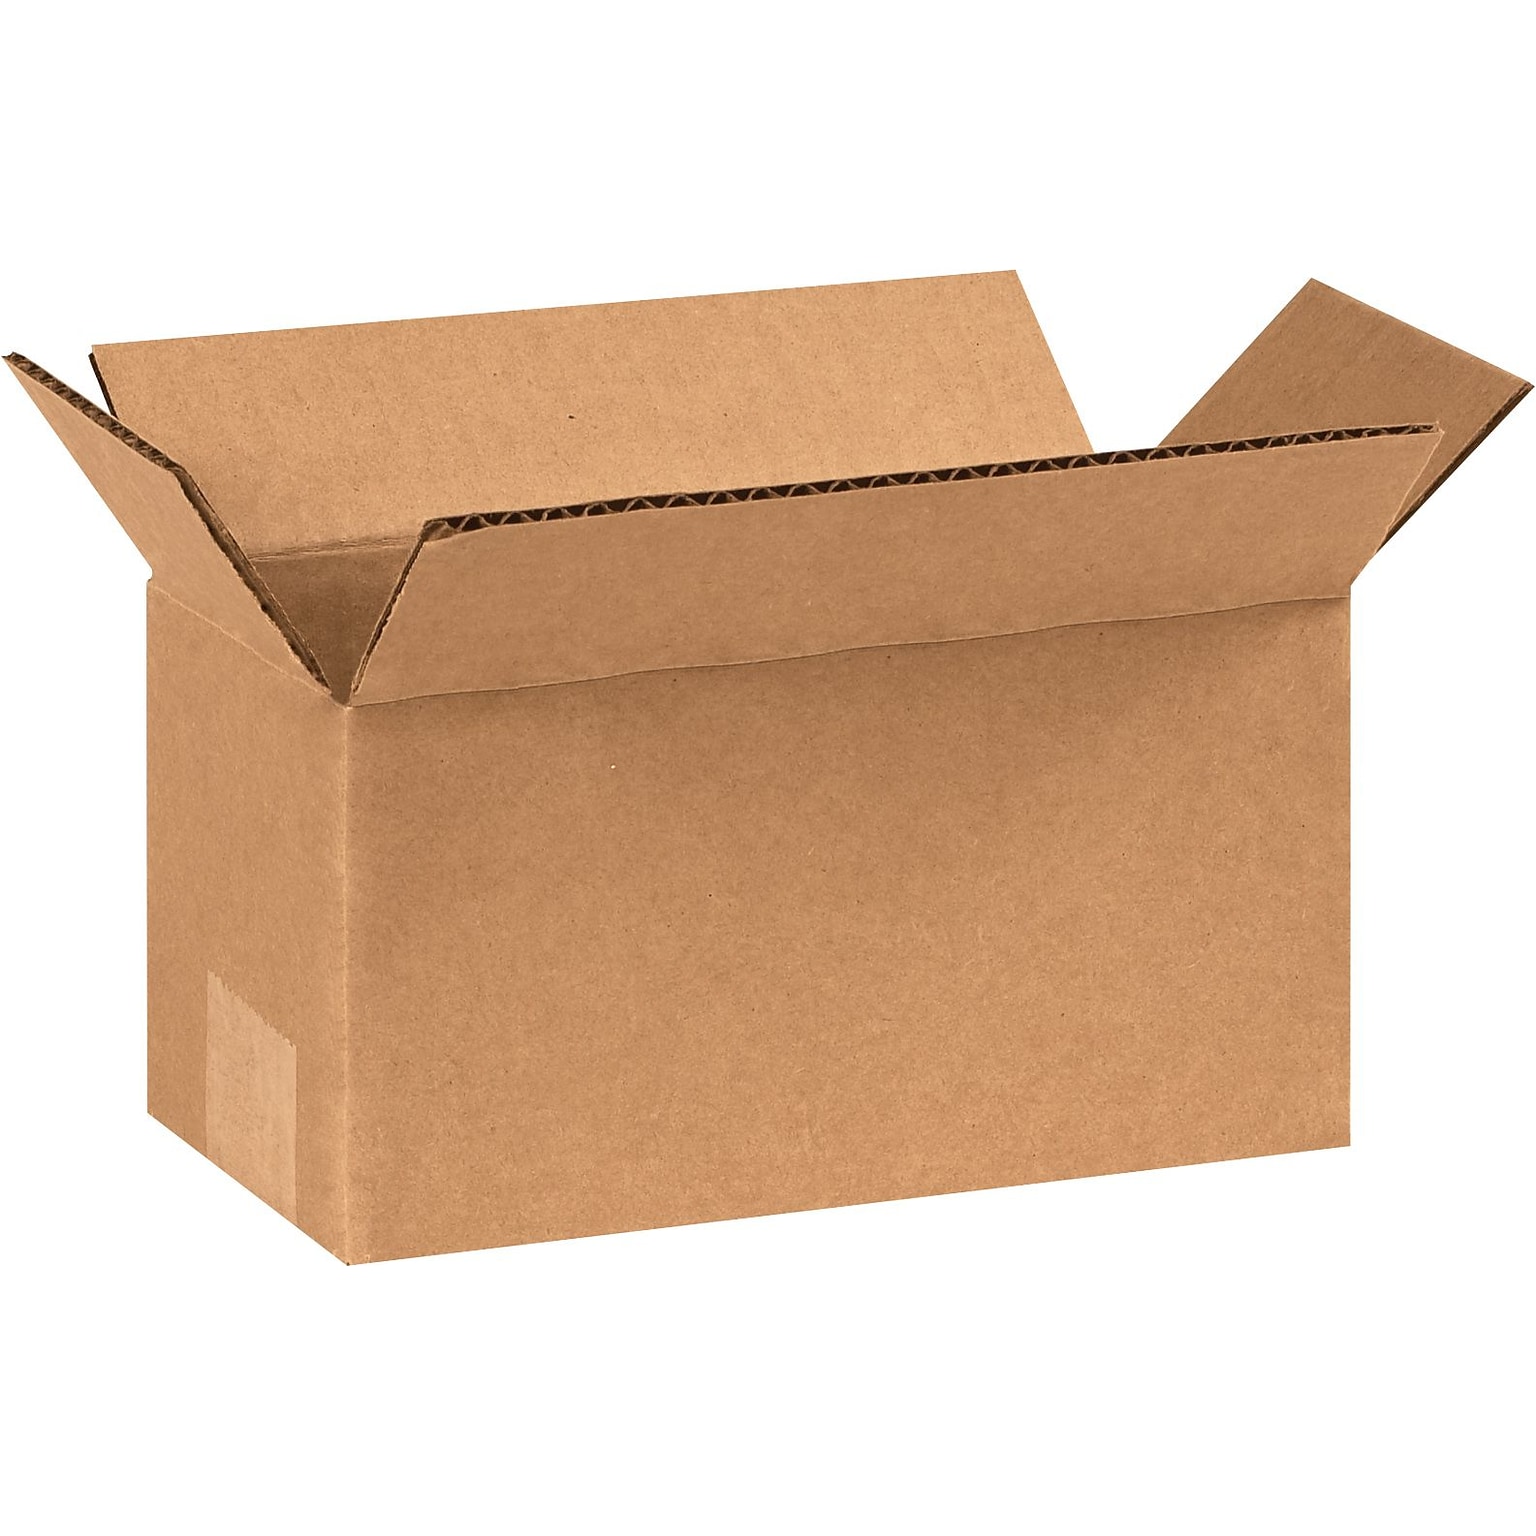 Quill Brand® Brand® 9 x 4 x 4 Shipping Boxes, 32 ECT, Brown, 25/Bundle (944)